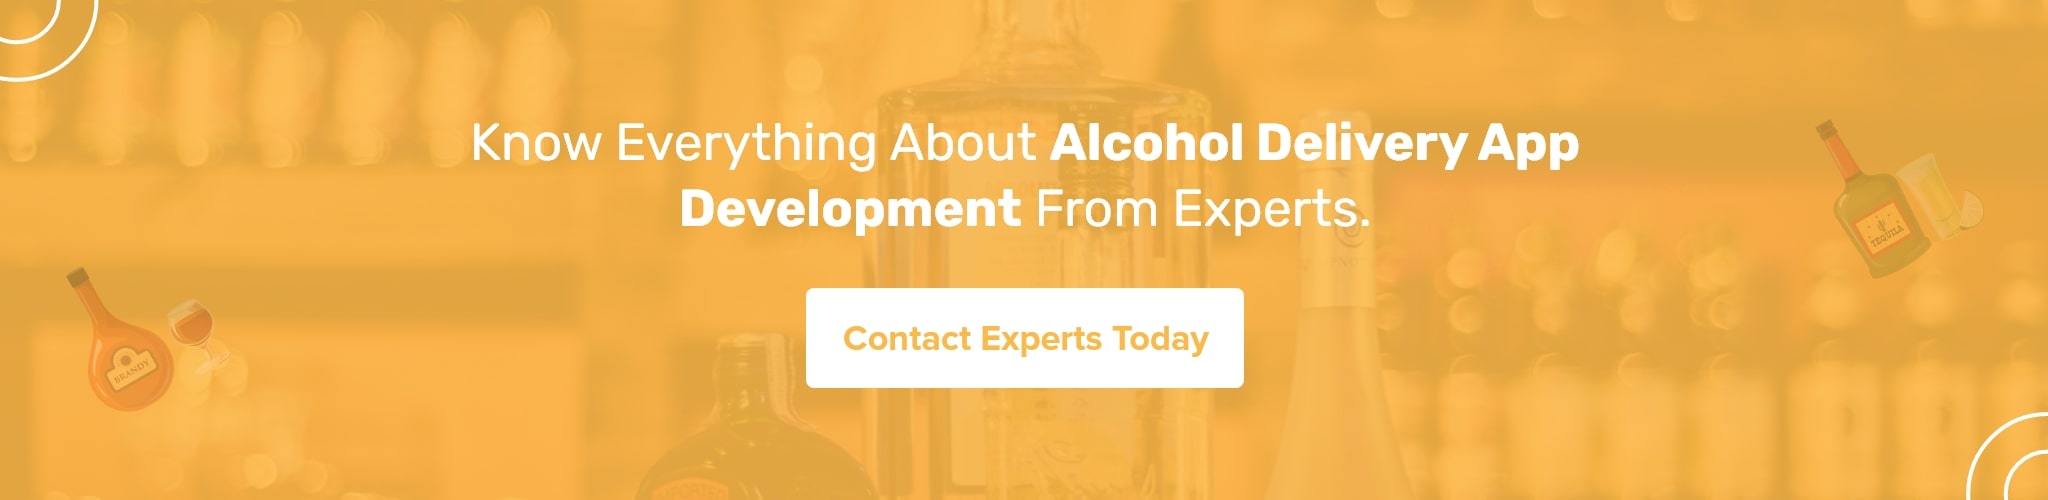 alcohol delivery app development with experts